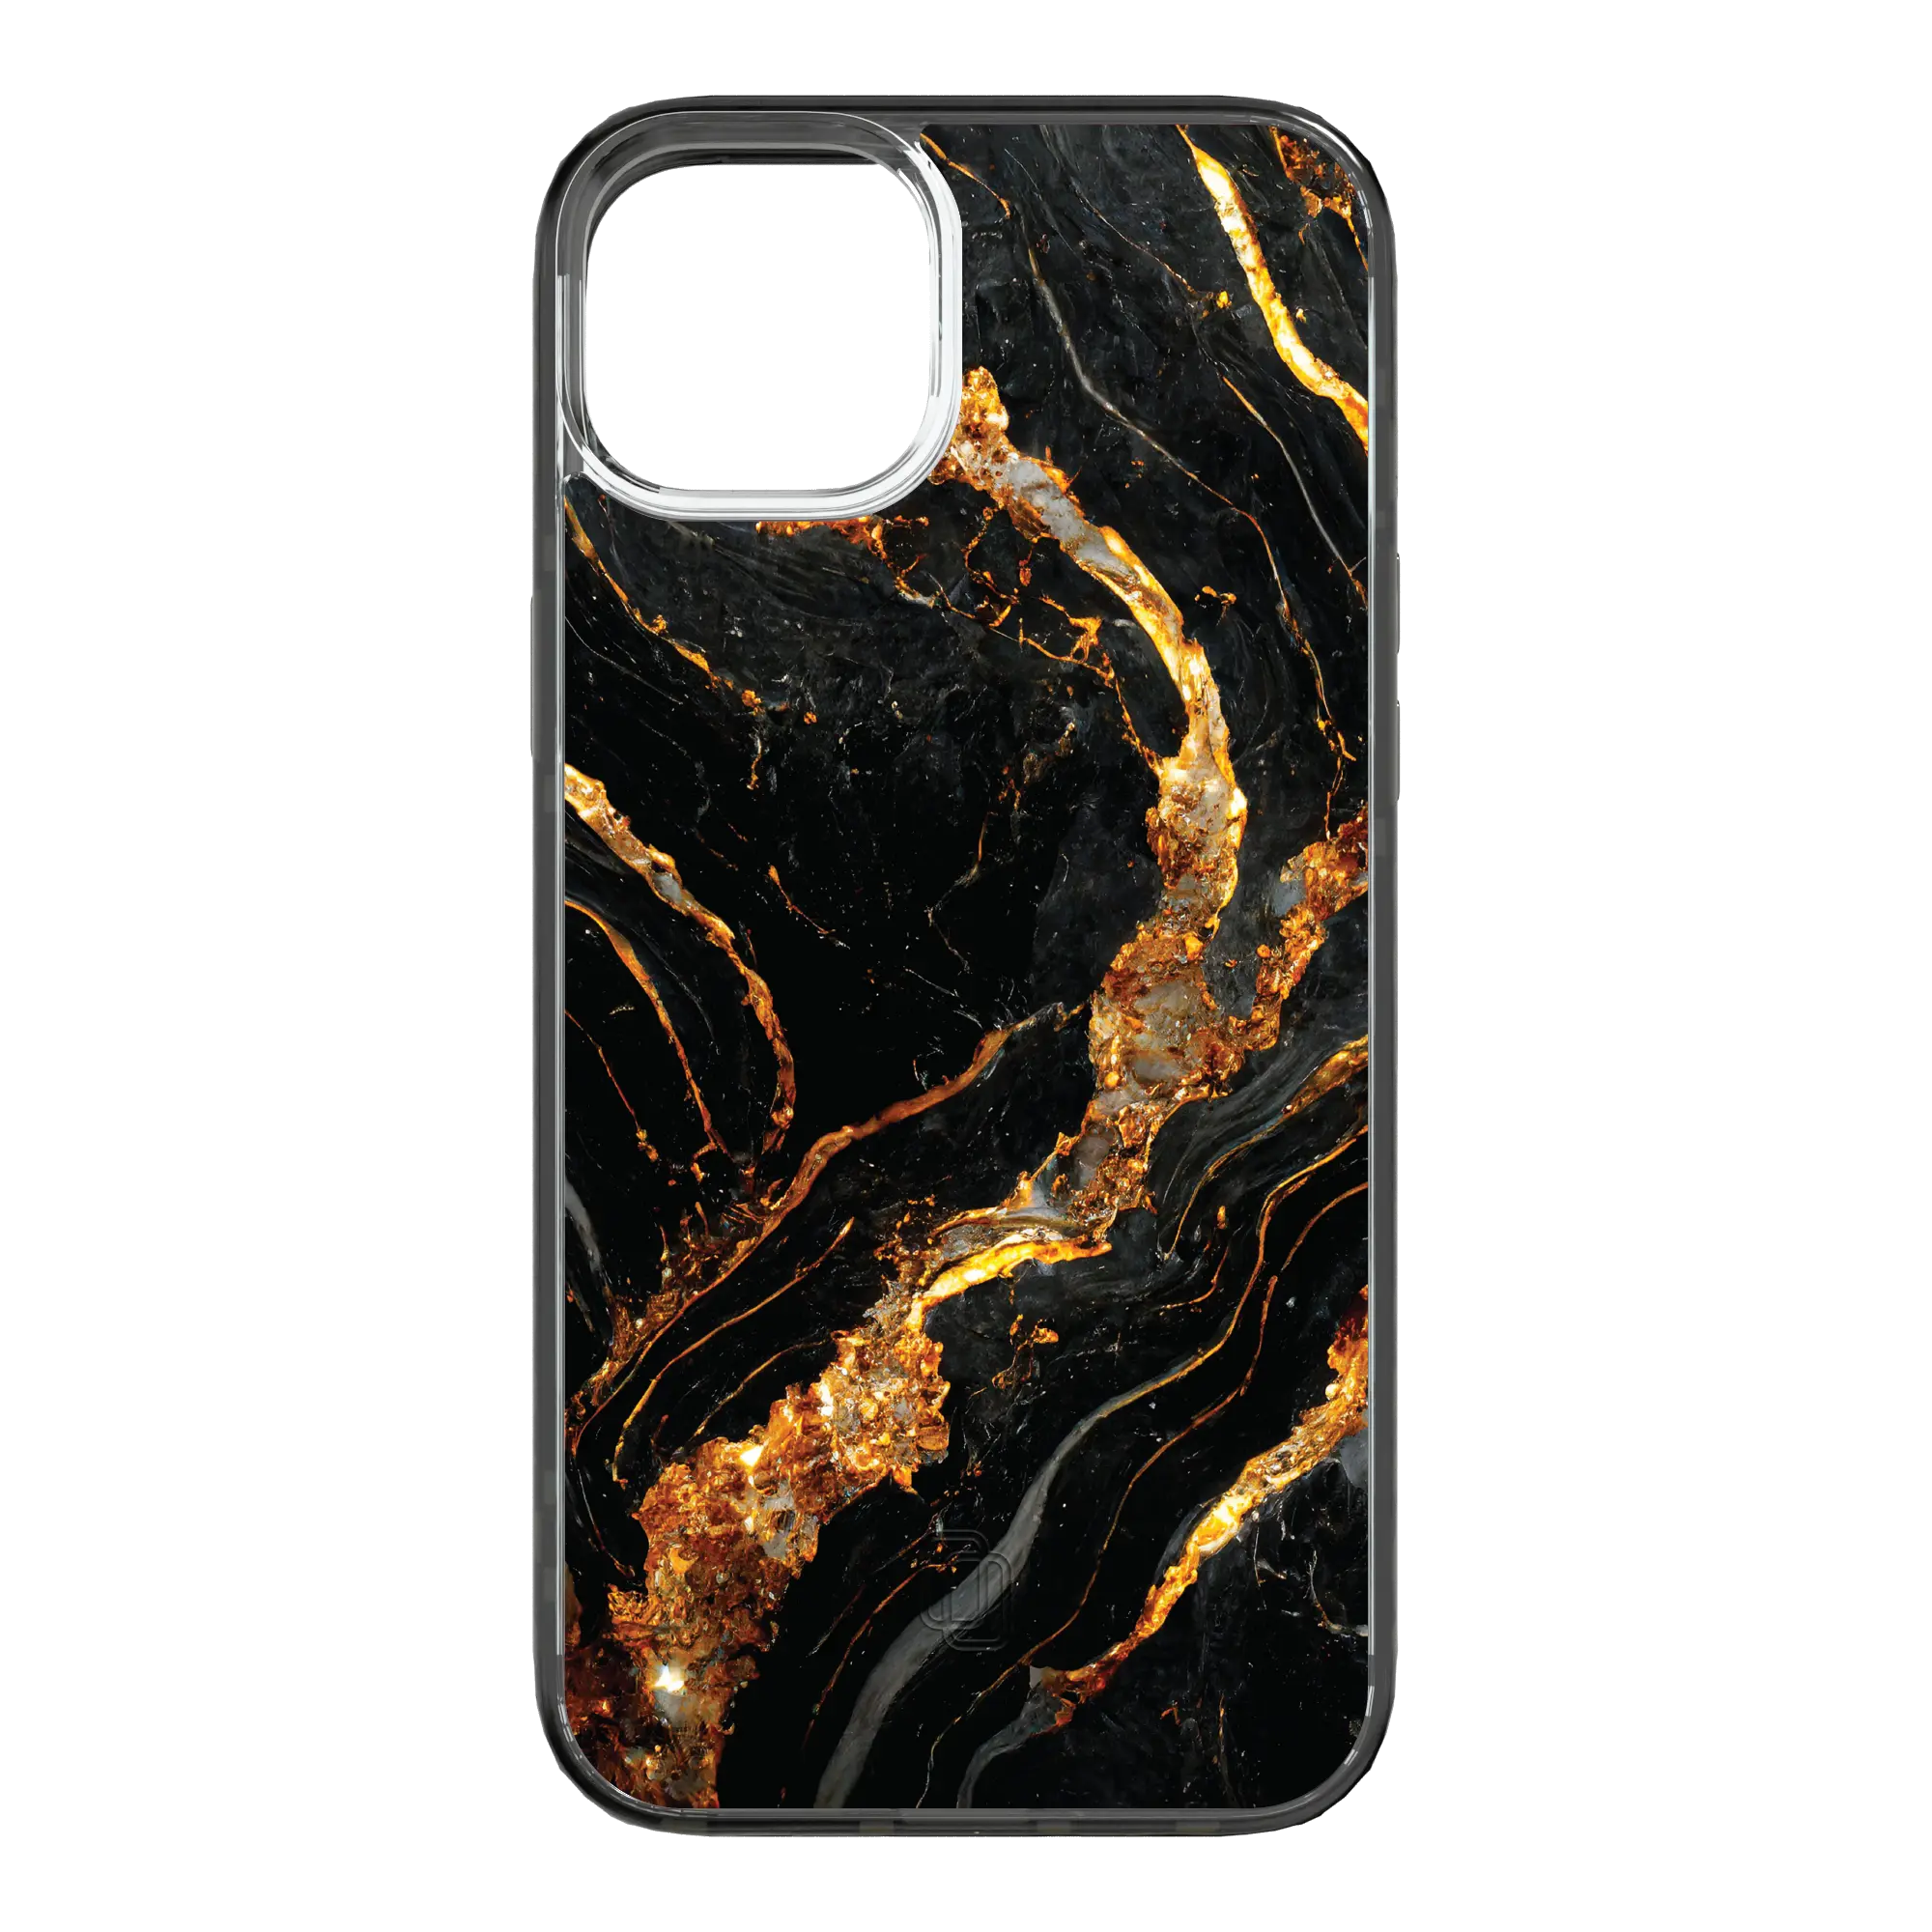 Apple-iPhone-15-Plus-Onyx-Black Dark Knight | Protective MagSafe Case | Marble Stone Series for Apple iPhone 15 Series cellhelmet cellhelmet